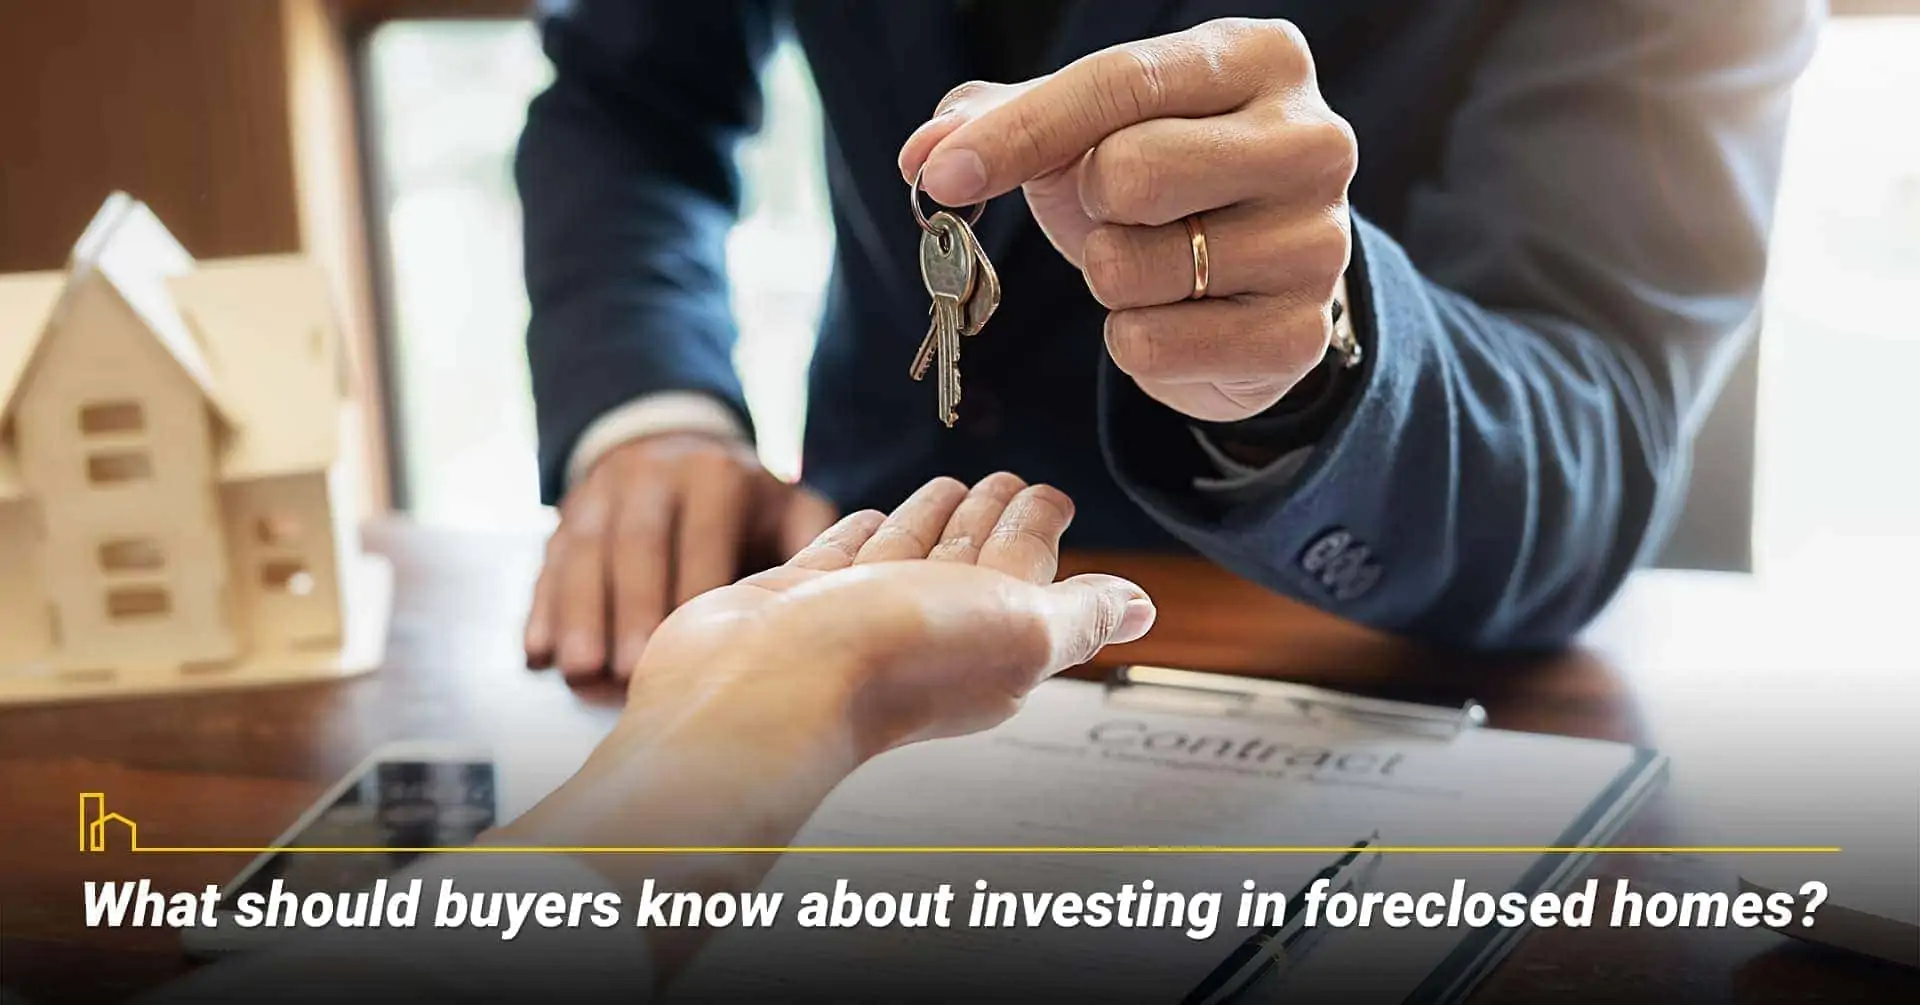 What should buyers know about investing in foreclosed homes? Things to consider when buying a foreclosed home